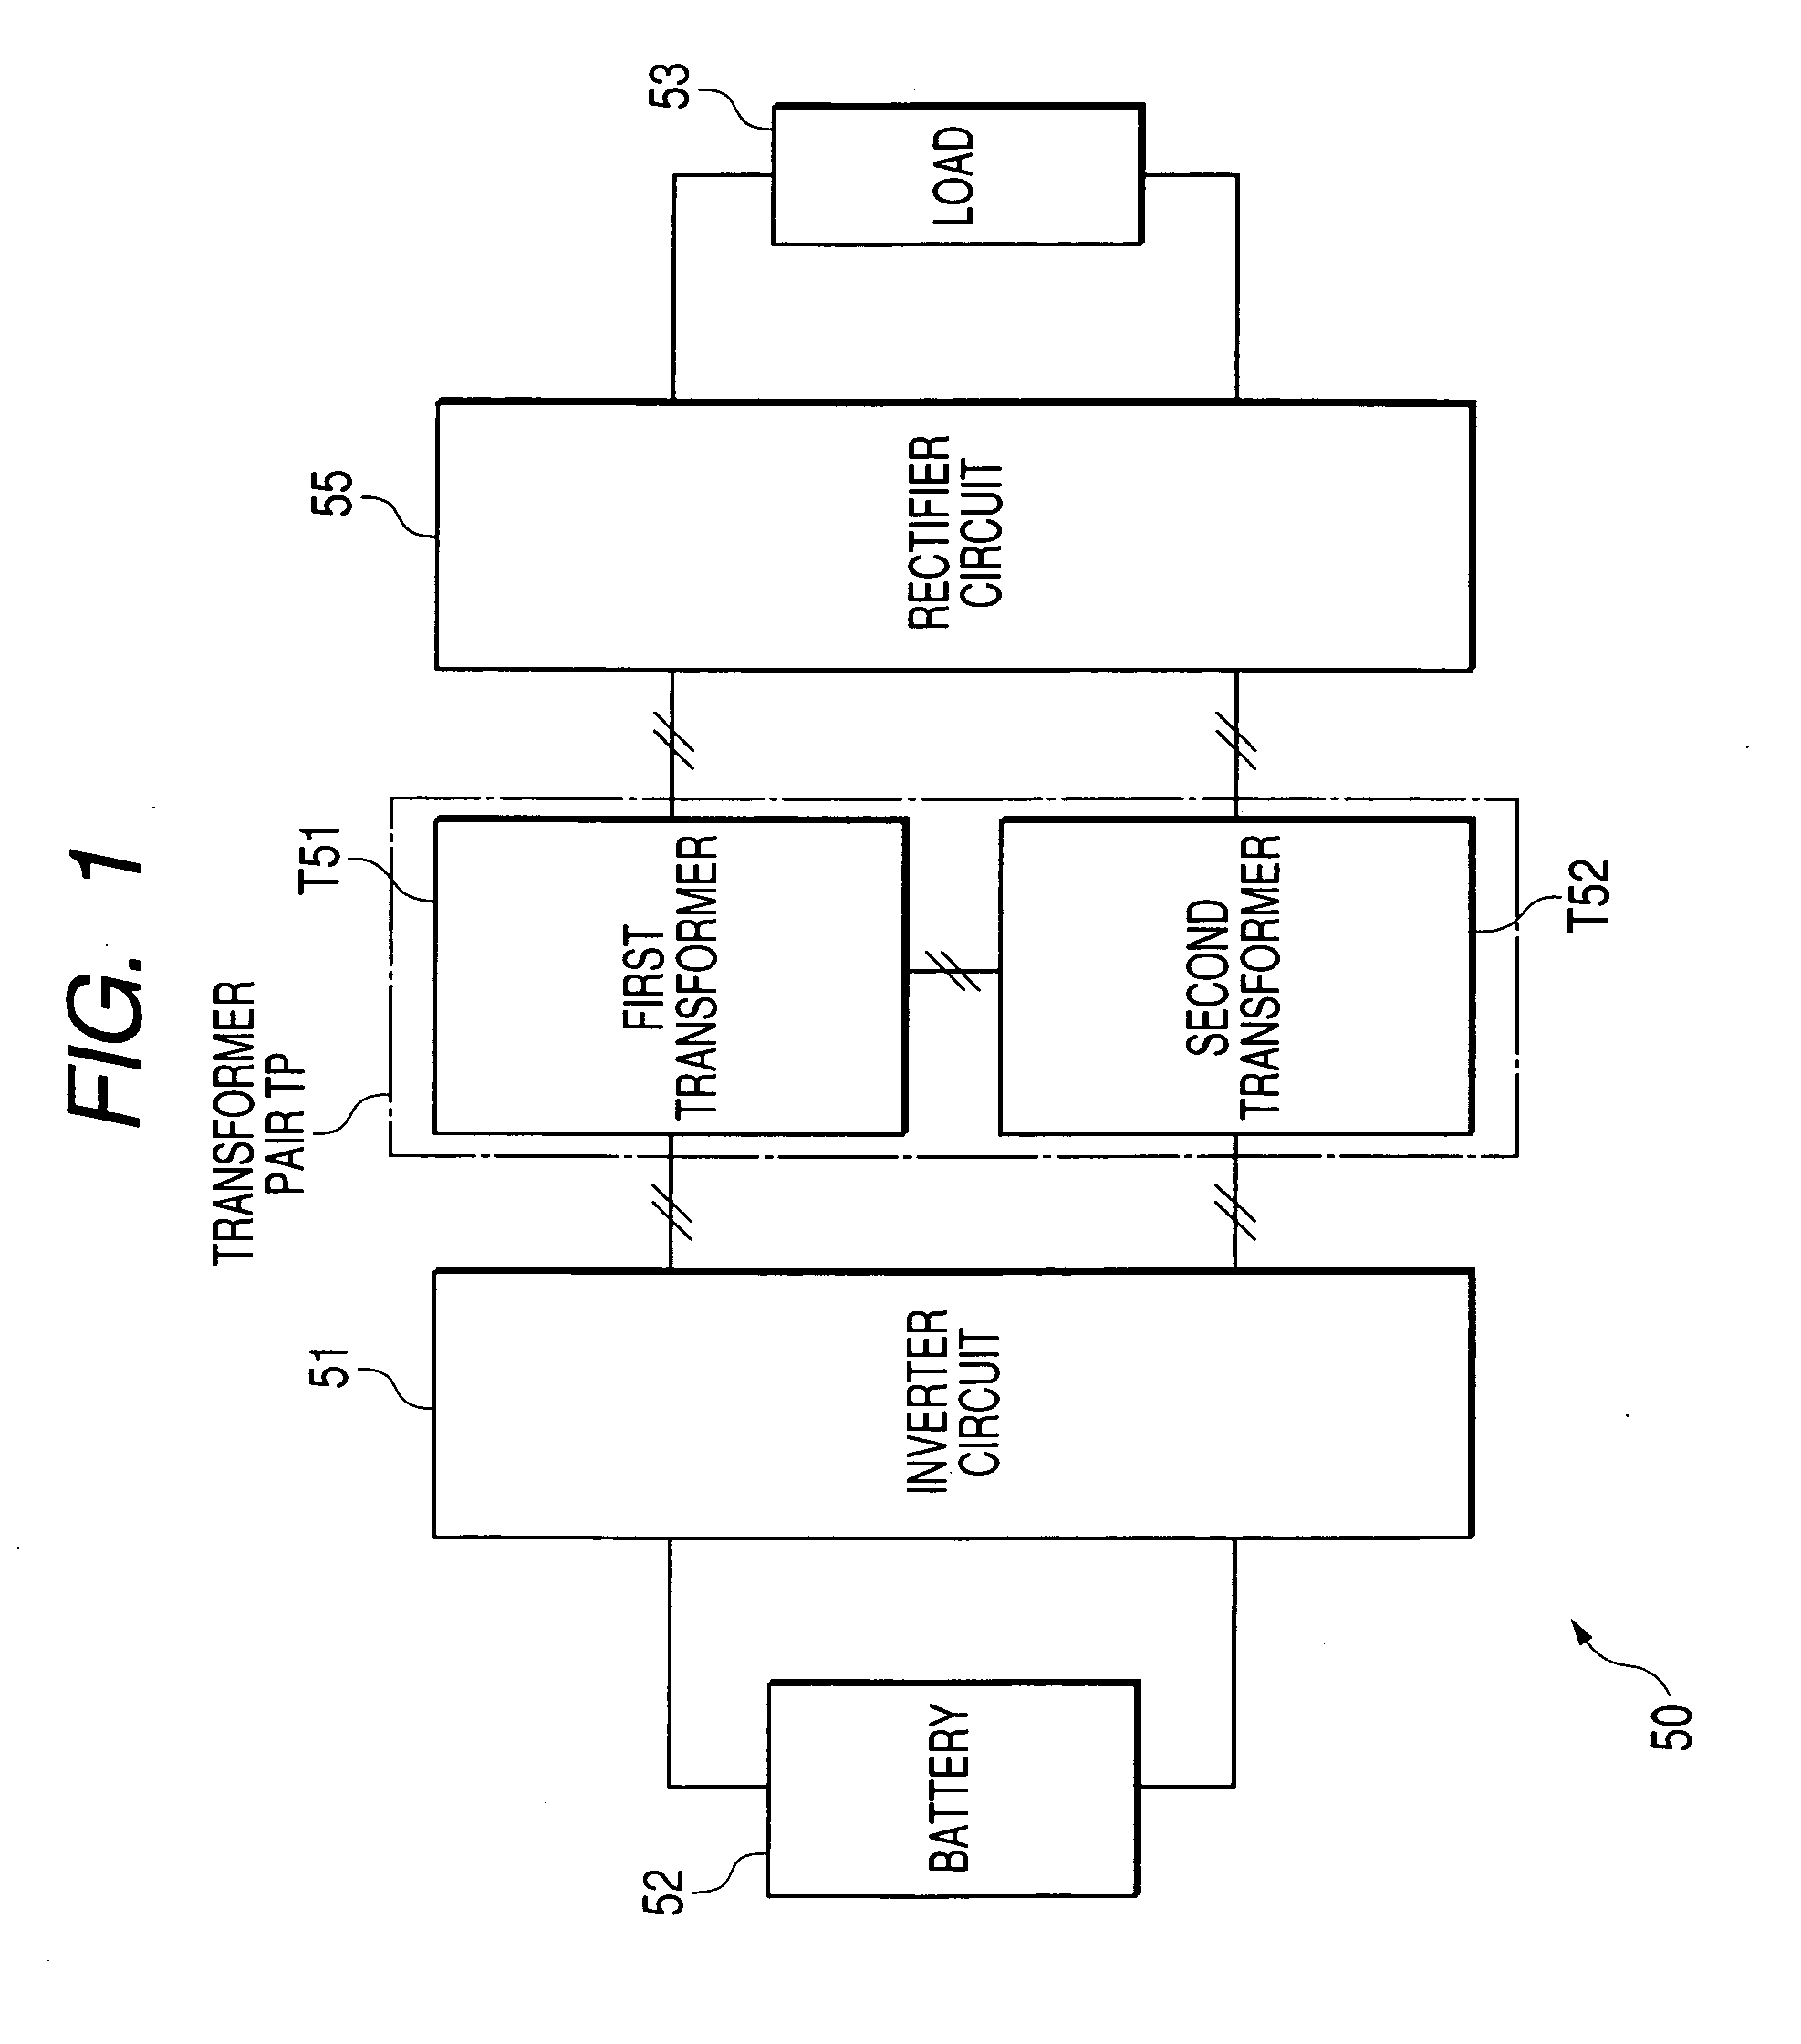 Dc-dc converter with integrated transformer assembly composed of transformer pair